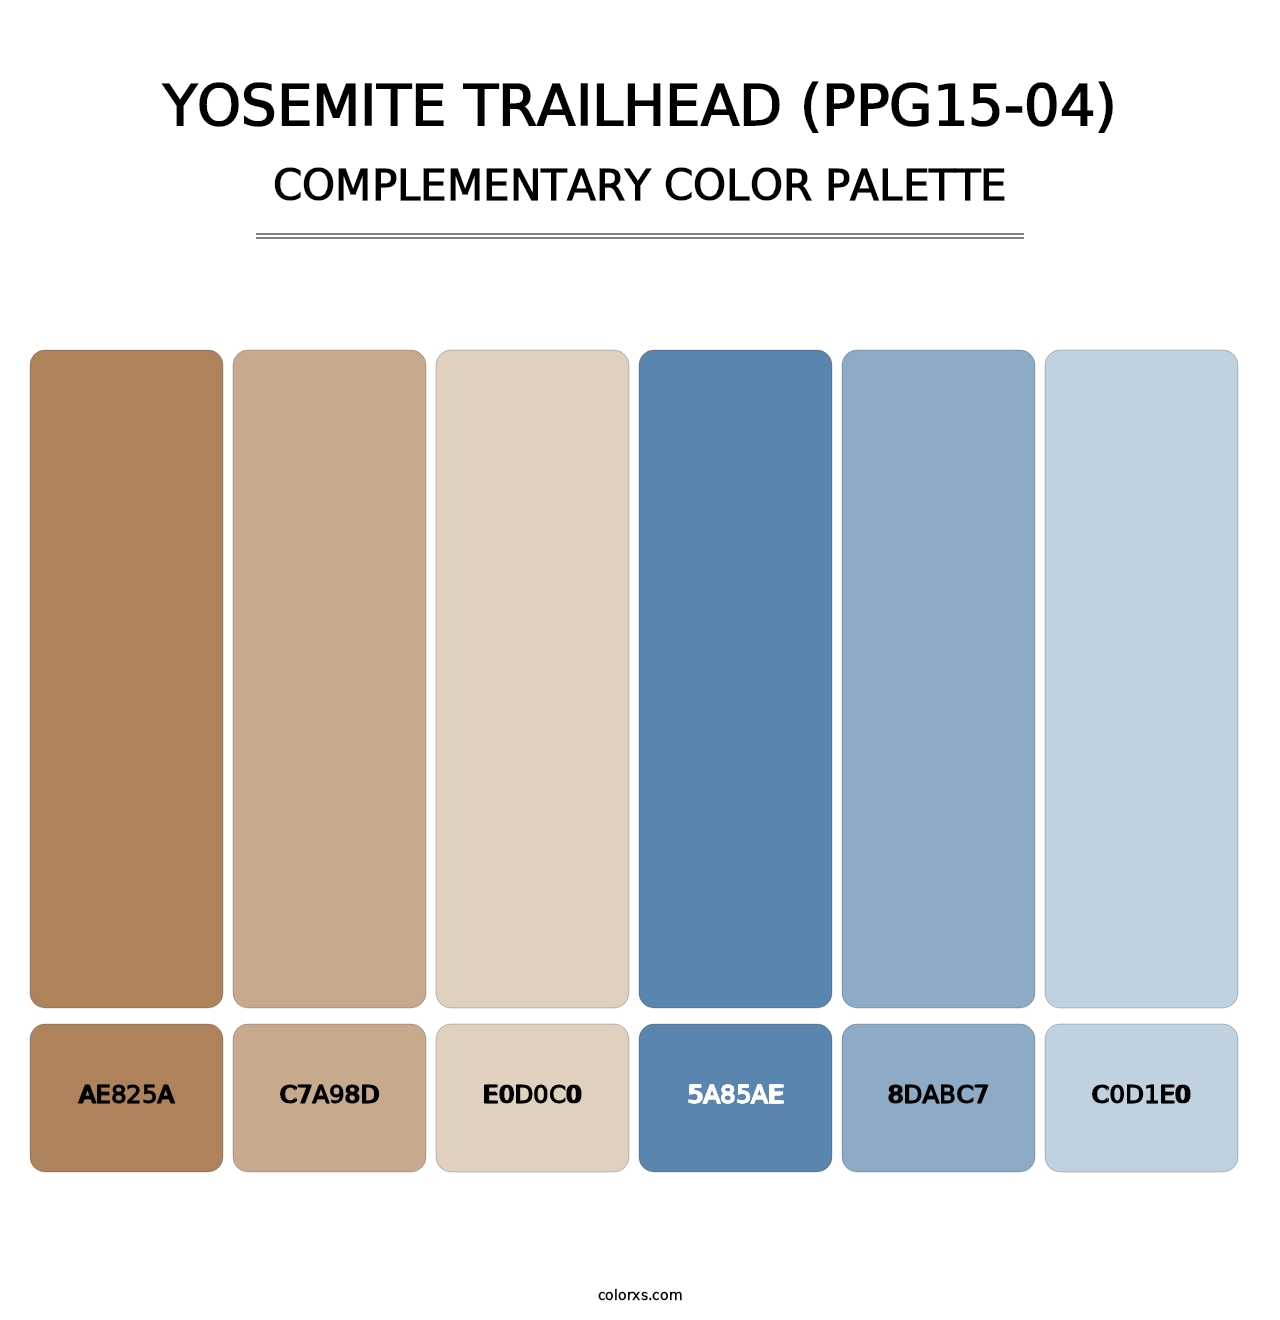 Yosemite Trailhead (PPG15-04) - Complementary Color Palette